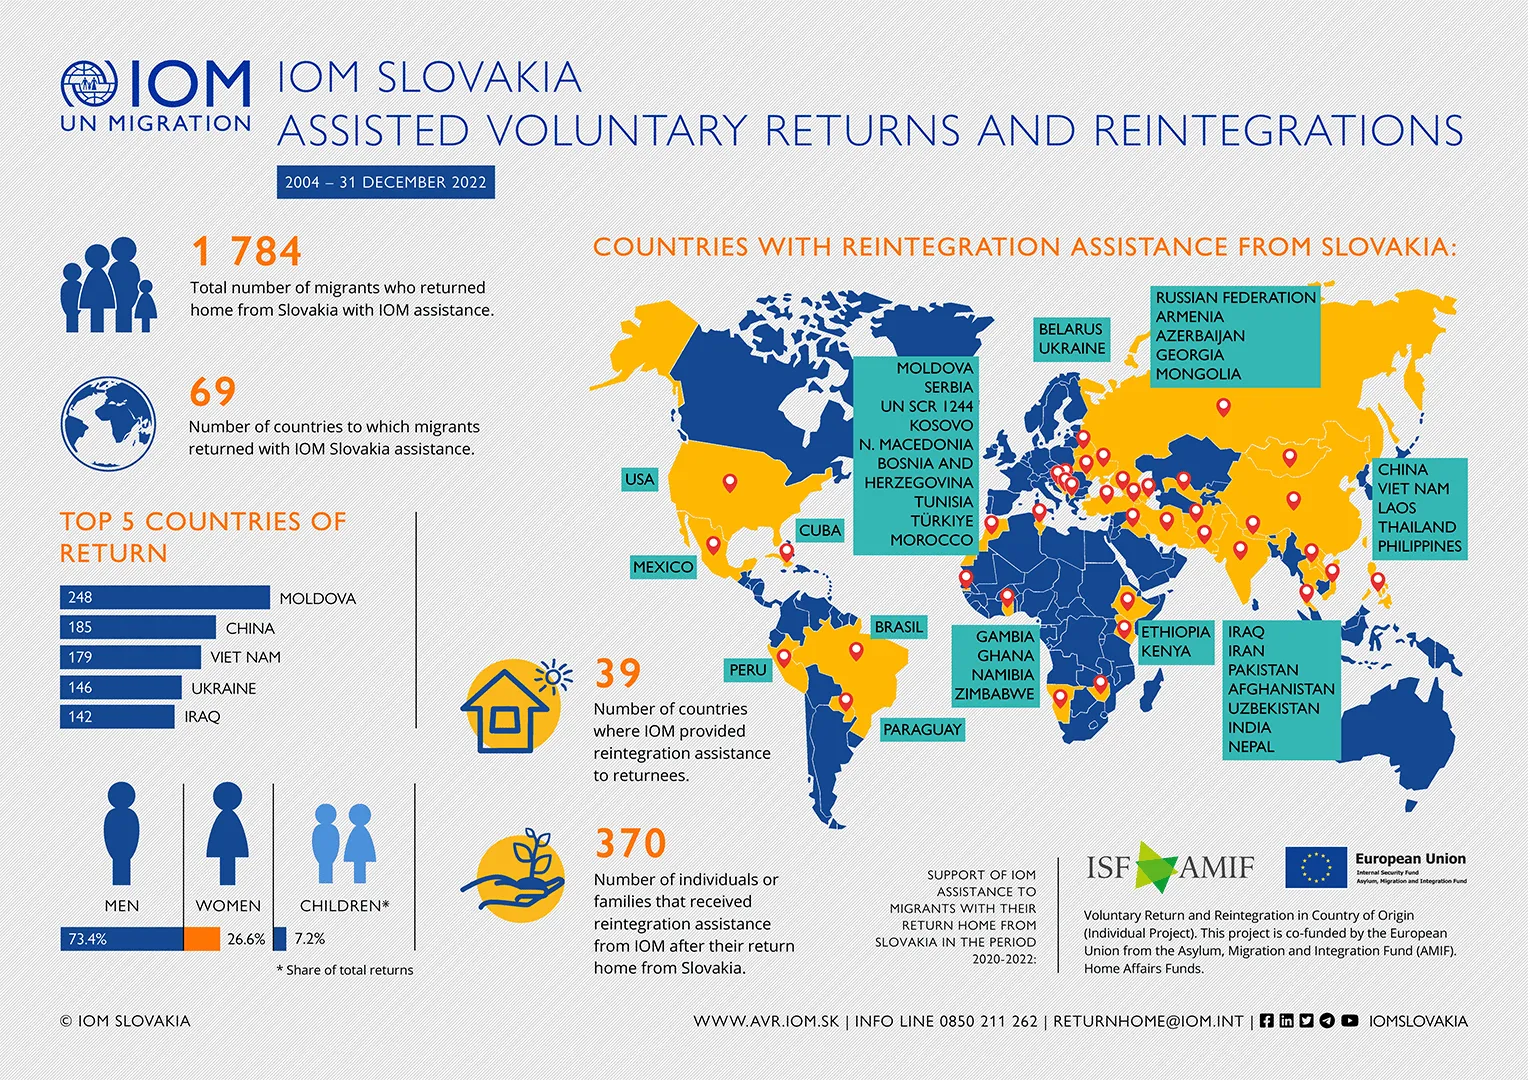 IOM - Infograph - Assisted Voluntary Returns and Reintegrations from Slovakia, 2004 - December 2022